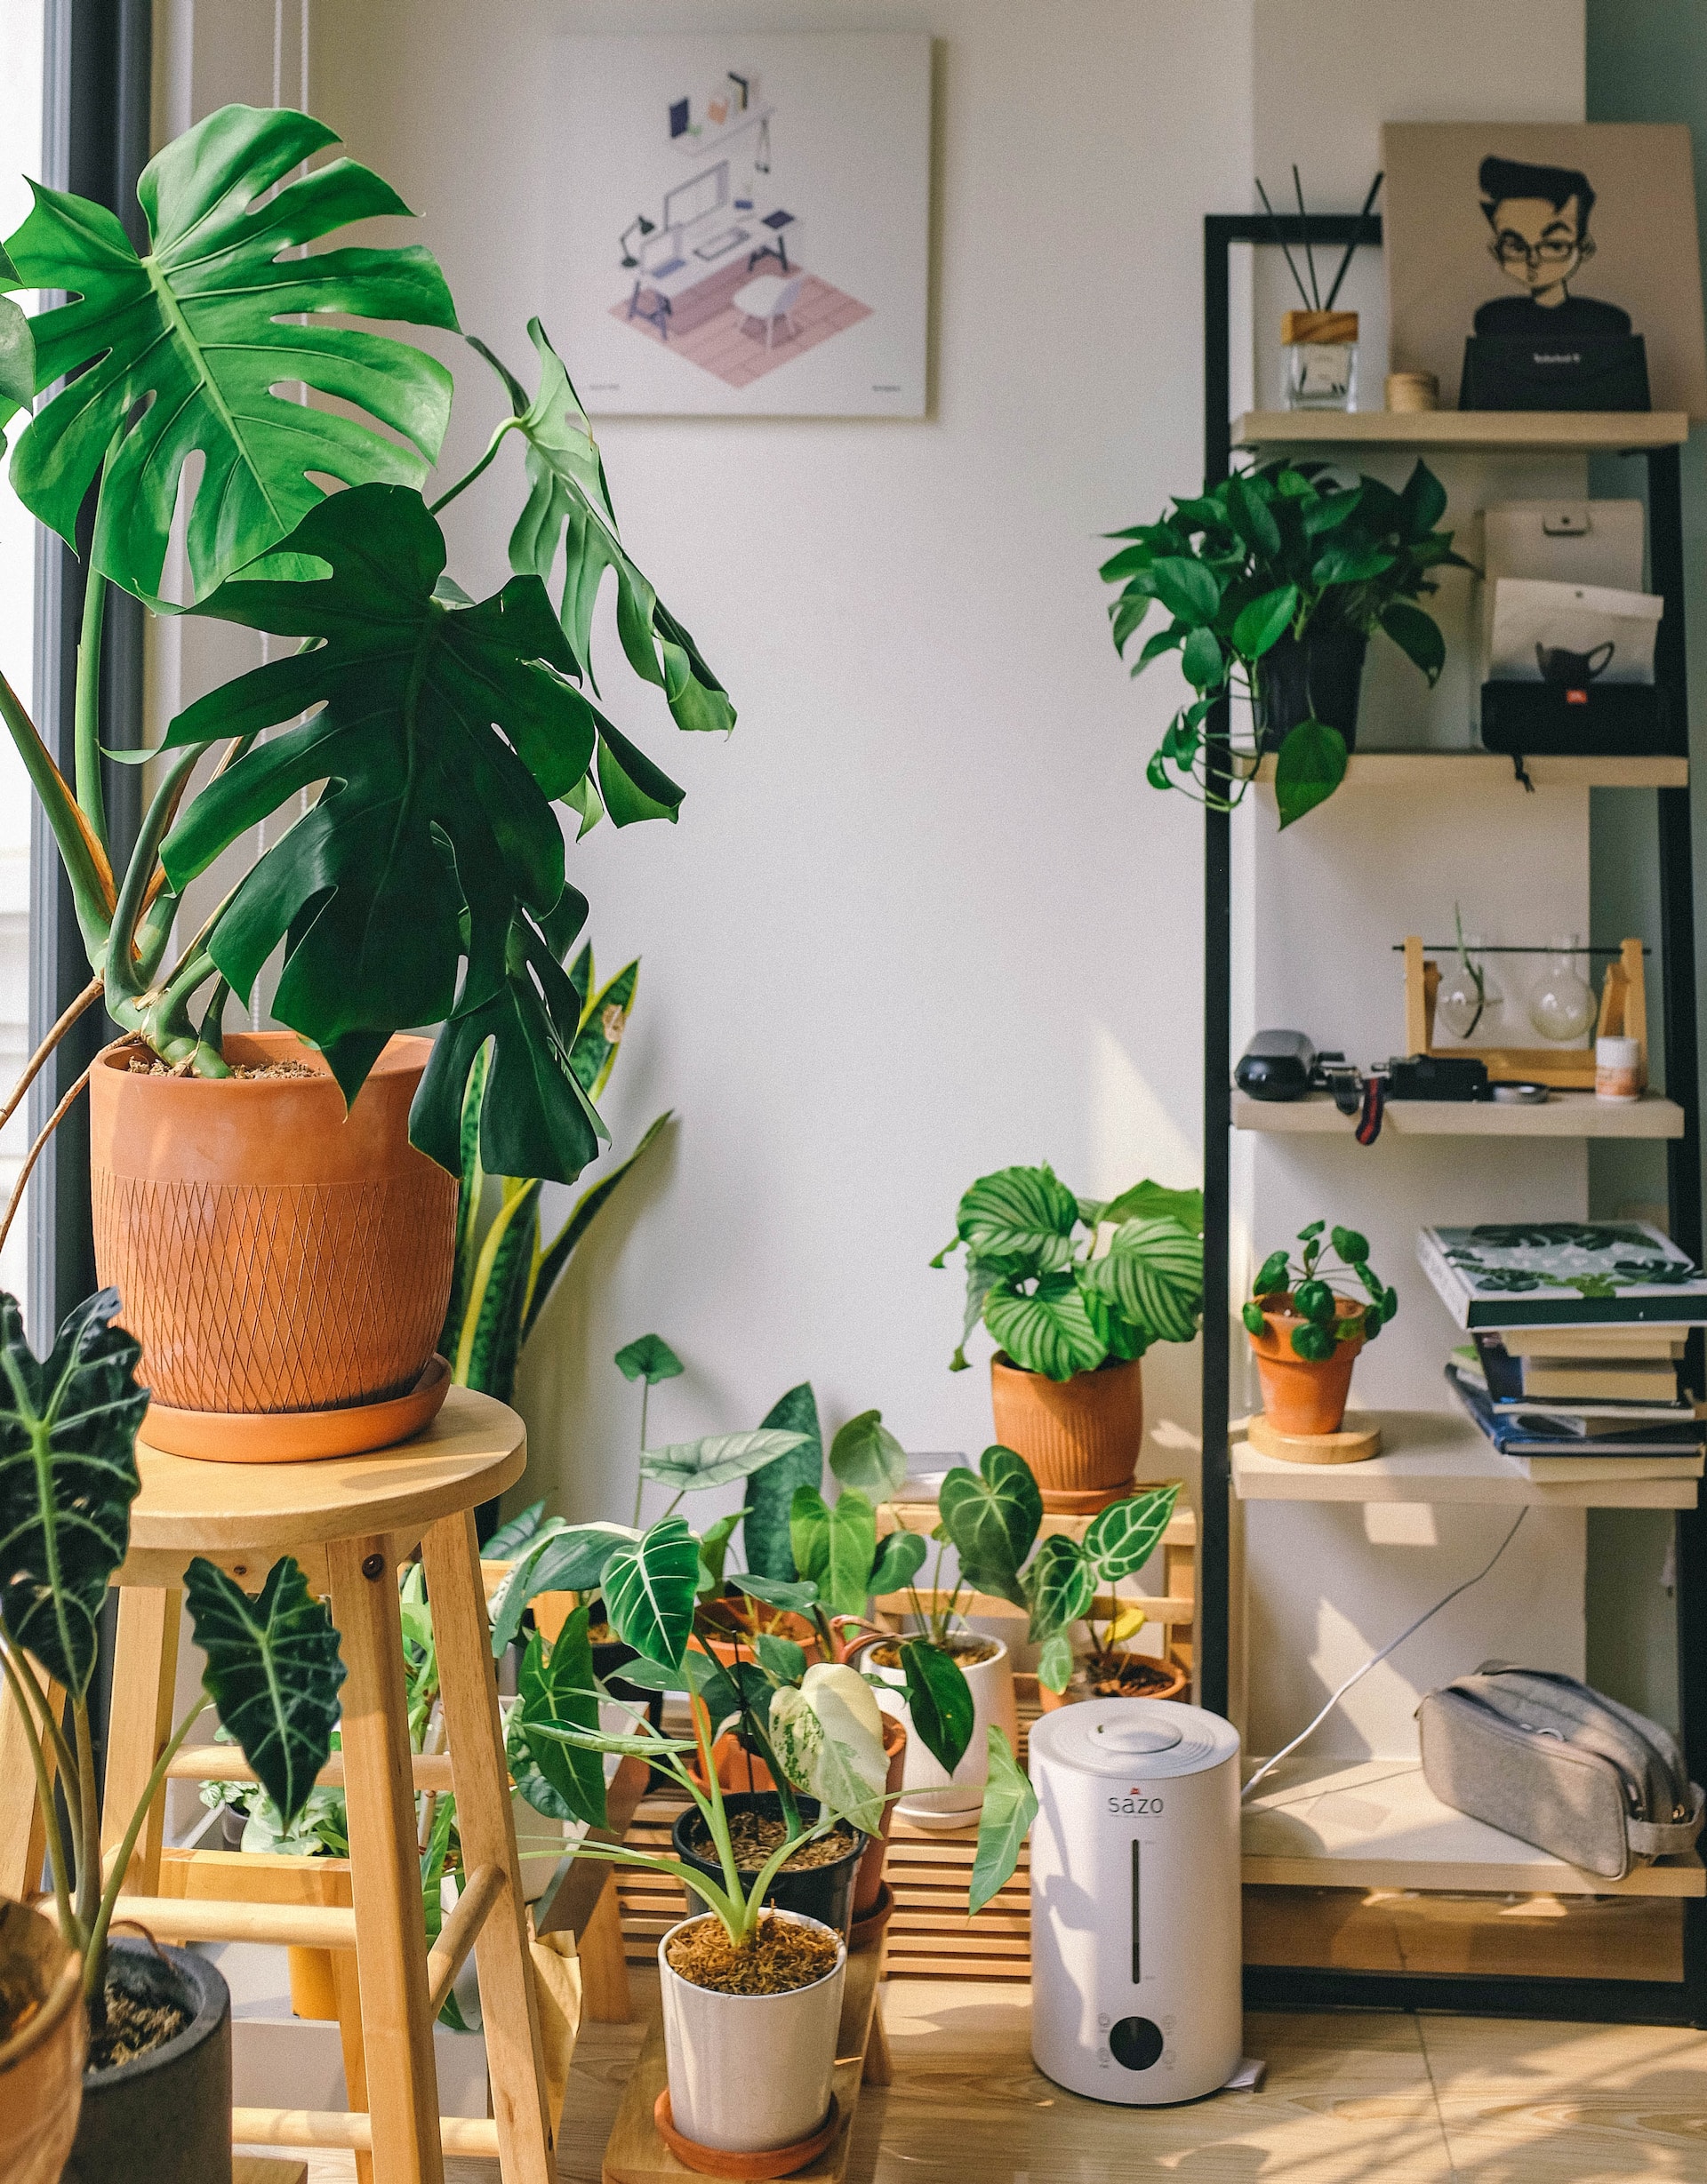 A Fresh Start for Your Leafy Companion: A Friendly Guide to Repotting Houseplants